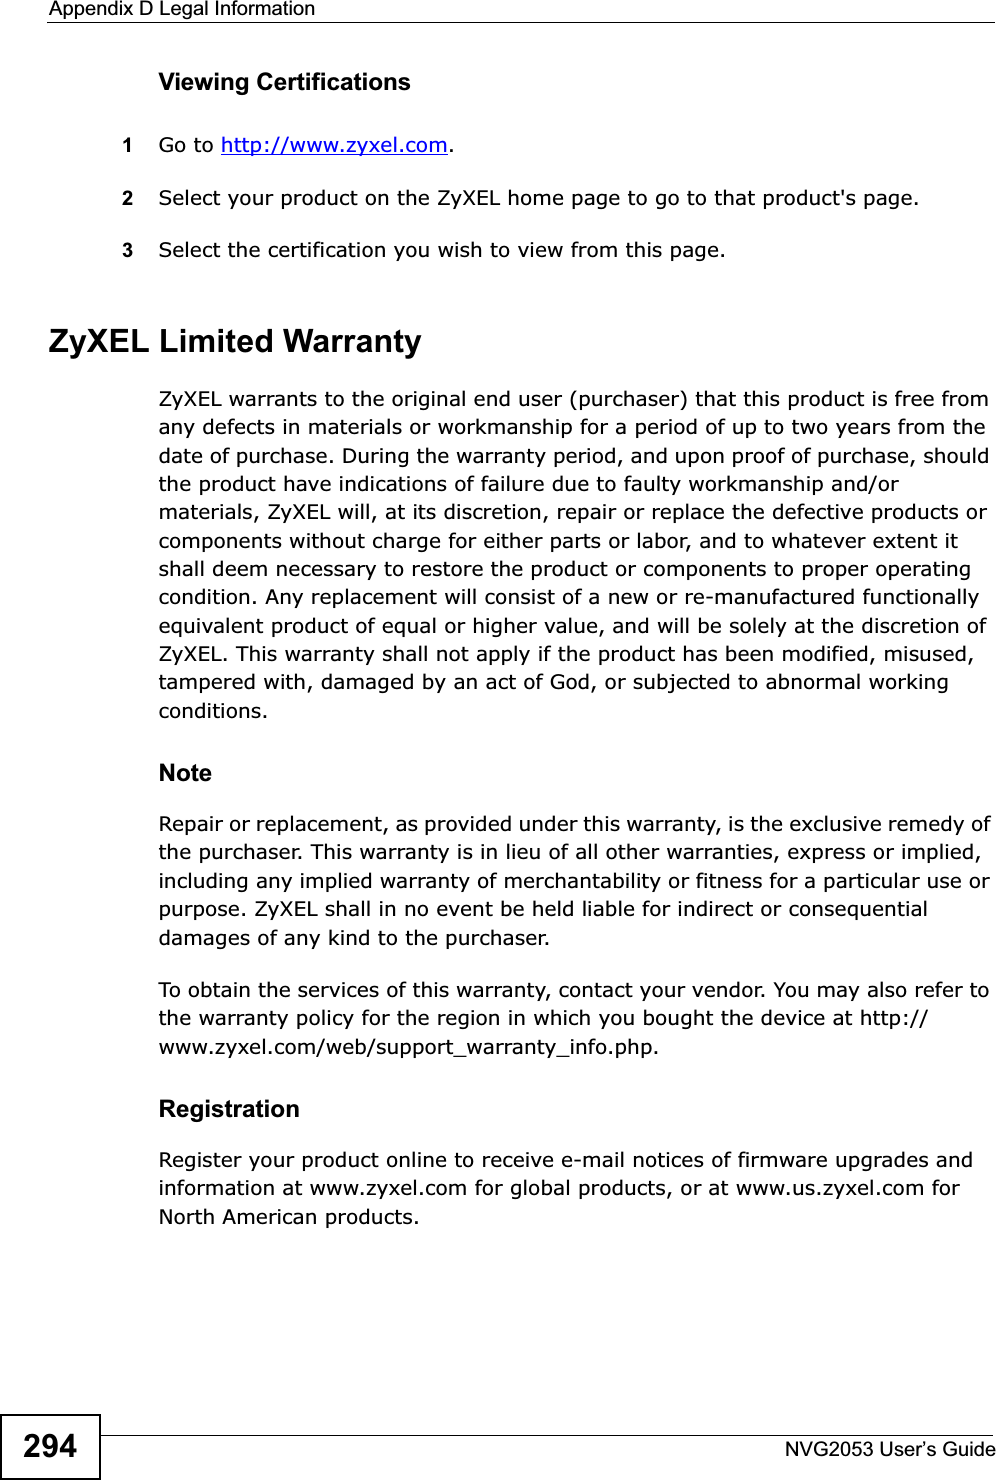 Appendix D Legal InformationNVG2053 User’s Guide294Viewing Certifications1Go to http://www.zyxel.com.2Select your product on the ZyXEL home page to go to that product&apos;s page.3Select the certification you wish to view from this page.ZyXEL Limited WarrantyZyXEL warrants to the original end user (purchaser) that this product is free from any defects in materials or workmanship for a period of up to two years from the date of purchase. During the warranty period, and upon proof of purchase, should the product have indications of failure due to faulty workmanship and/or materials, ZyXEL will, at its discretion, repair or replace the defective products or components without charge for either parts or labor, and to whatever extent it shall deem necessary to restore the product or components to proper operating condition. Any replacement will consist of a new or re-manufactured functionally equivalent product of equal or higher value, and will be solely at the discretion of ZyXEL. This warranty shall not apply if the product has been modified, misused, tampered with, damaged by an act of God, or subjected to abnormal working conditions.NoteRepair or replacement, as provided under this warranty, is the exclusive remedy of the purchaser. This warranty is in lieu of all other warranties, express or implied, including any implied warranty of merchantability or fitness for a particular use or purpose. ZyXEL shall in no event be held liable for indirect or consequential damages of any kind to the purchaser.To obtain the services of this warranty, contact your vendor. You may also refer to the warranty policy for the region in which you bought the device at http://www.zyxel.com/web/support_warranty_info.php.RegistrationRegister your product online to receive e-mail notices of firmware upgrades and information at www.zyxel.com for global products, or at www.us.zyxel.com for North American products.